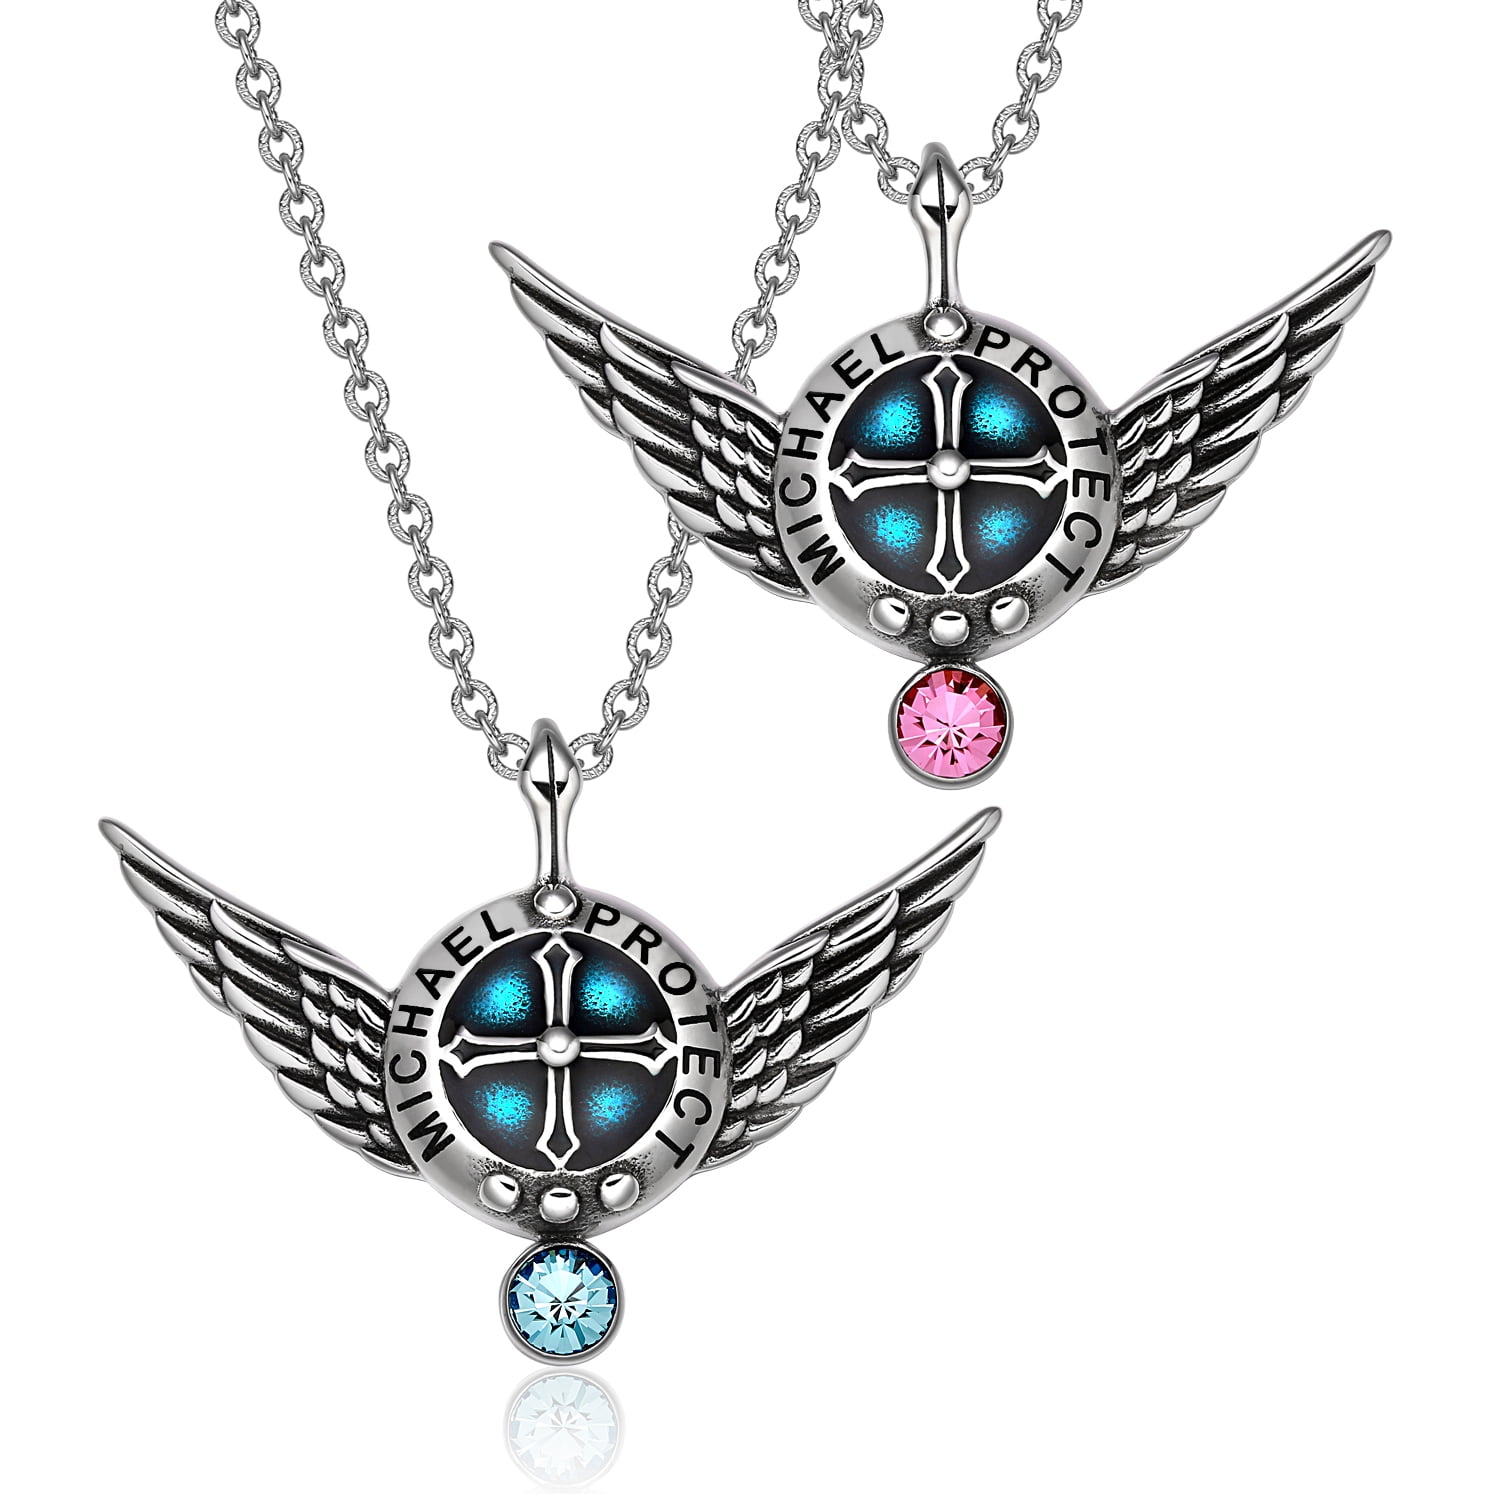 Angel Wings Archangel Michael Love Couples or Best Friends Set Sky Blue and Pink Pendant Necklaces 